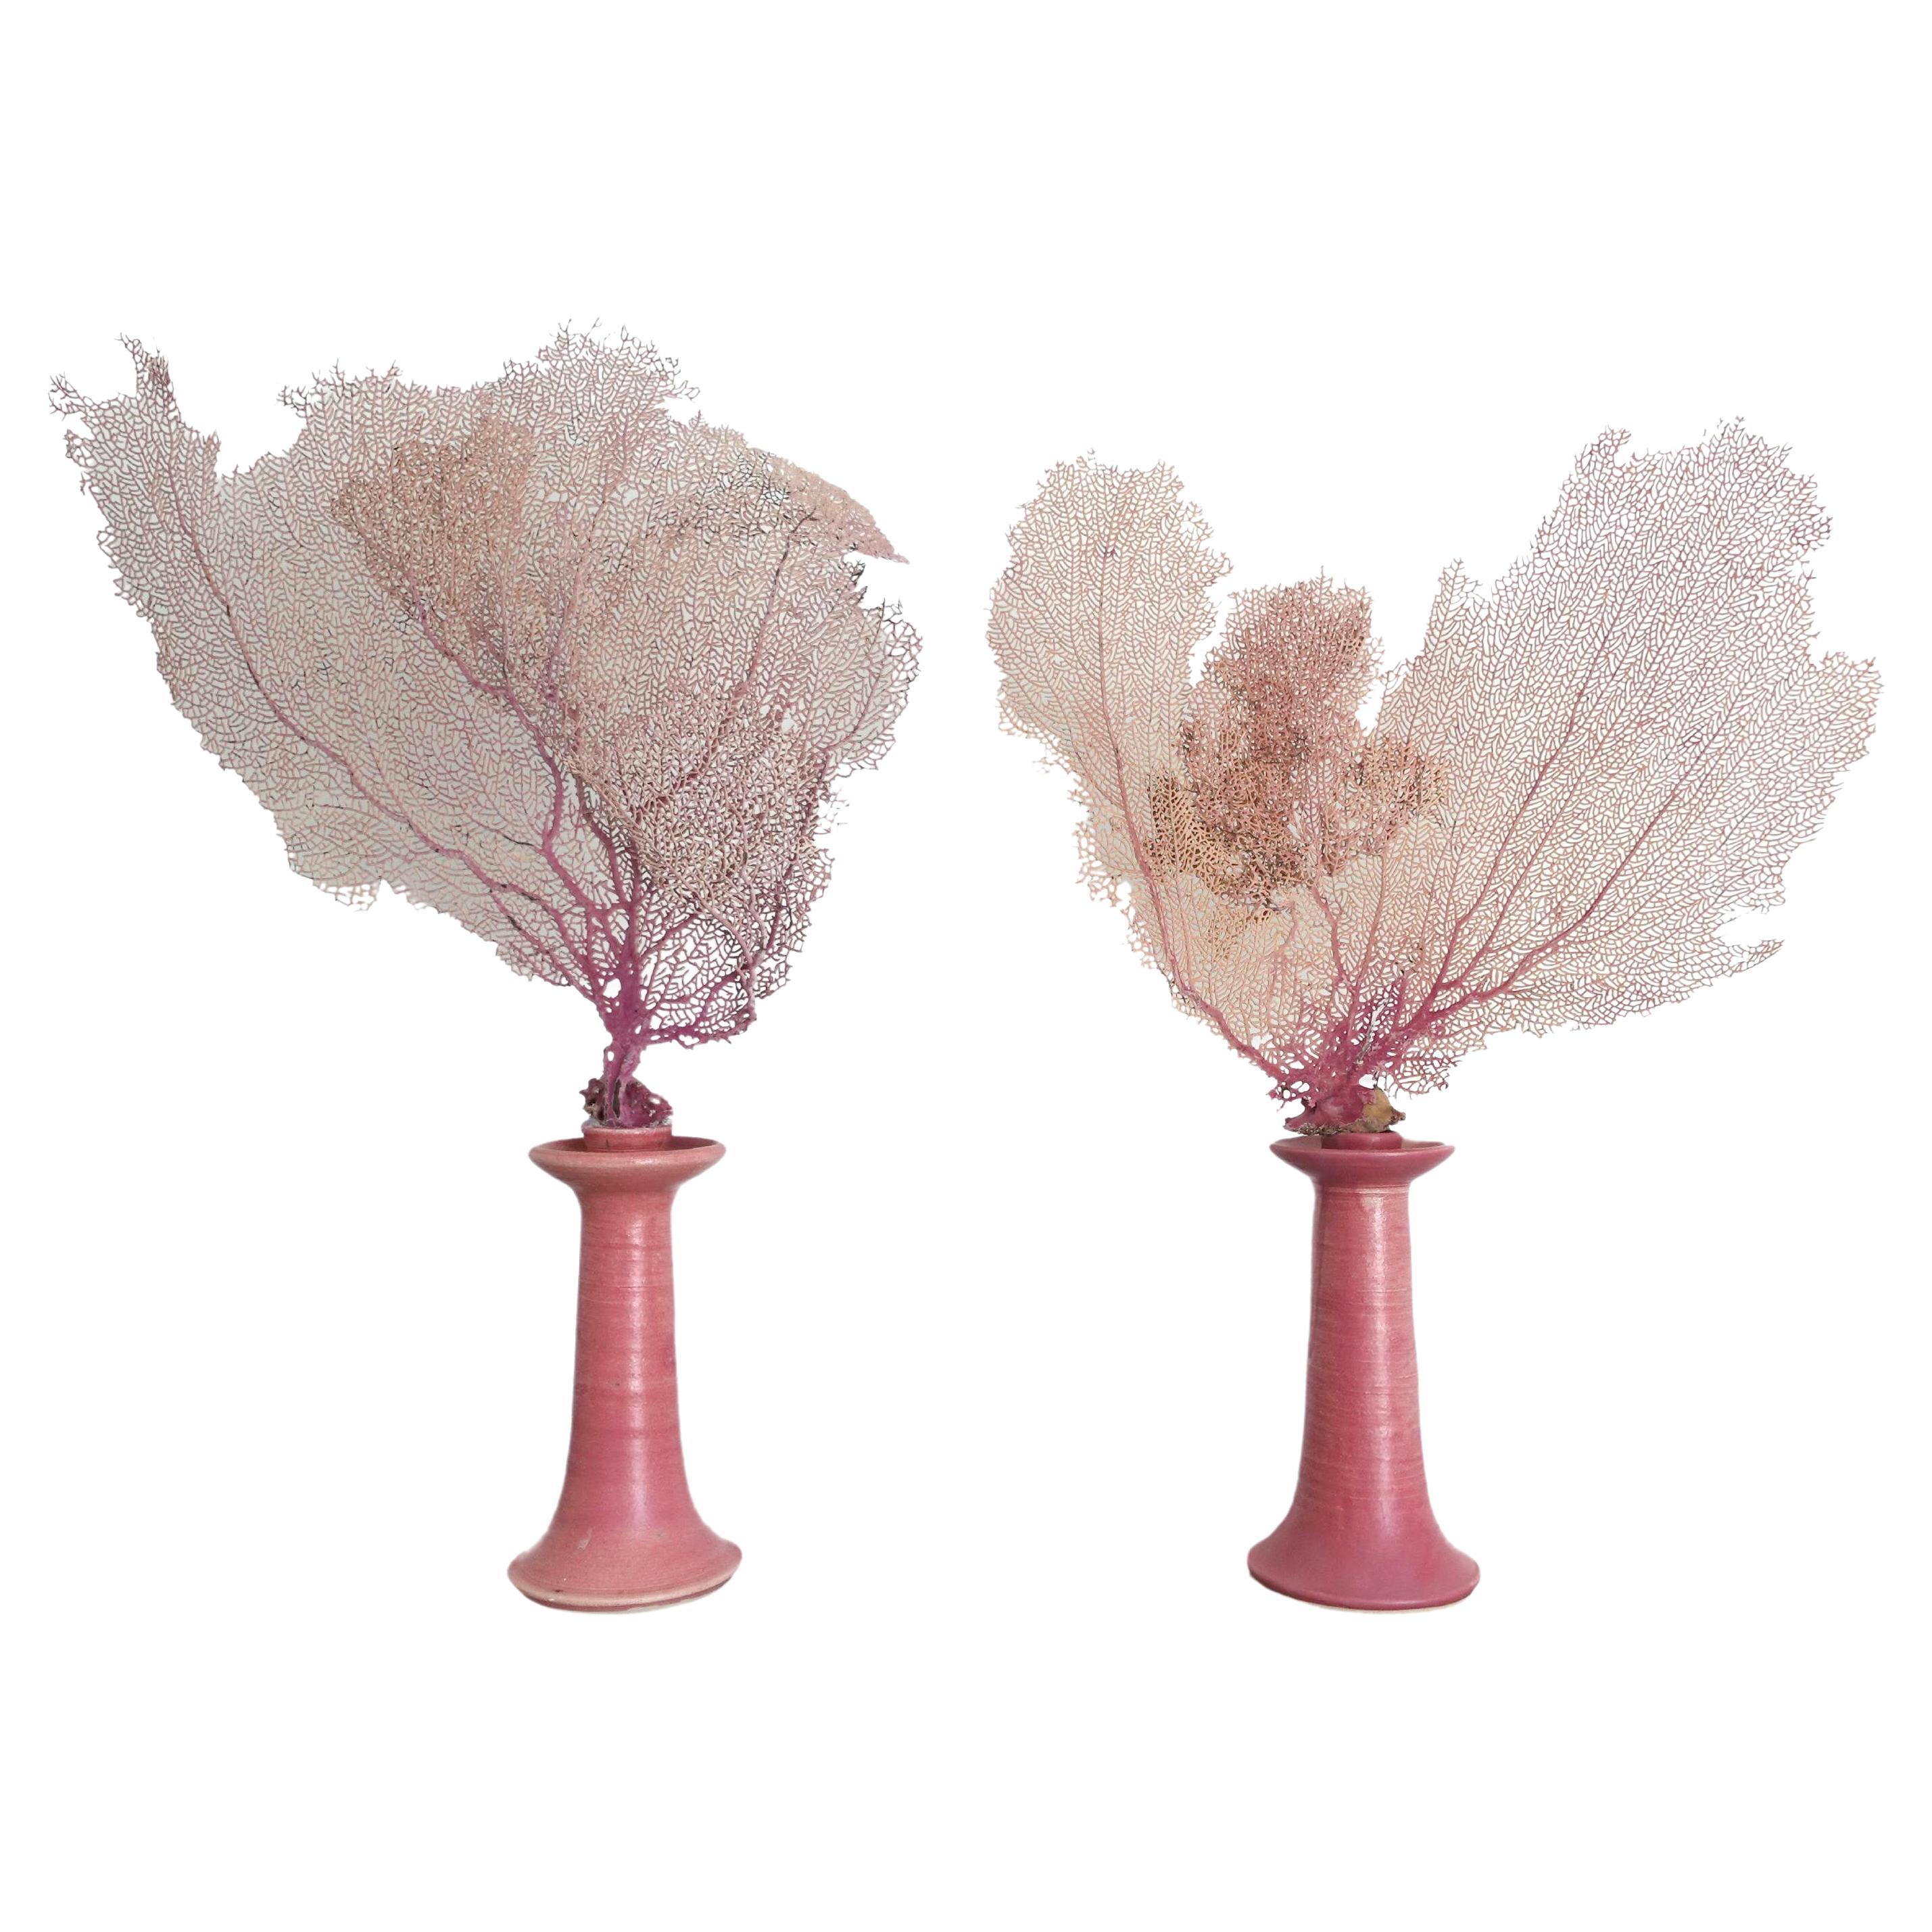 Pair of Pink Natural Sea Fans mounted to hand-made Candlesticks by Chriscoe For Sale